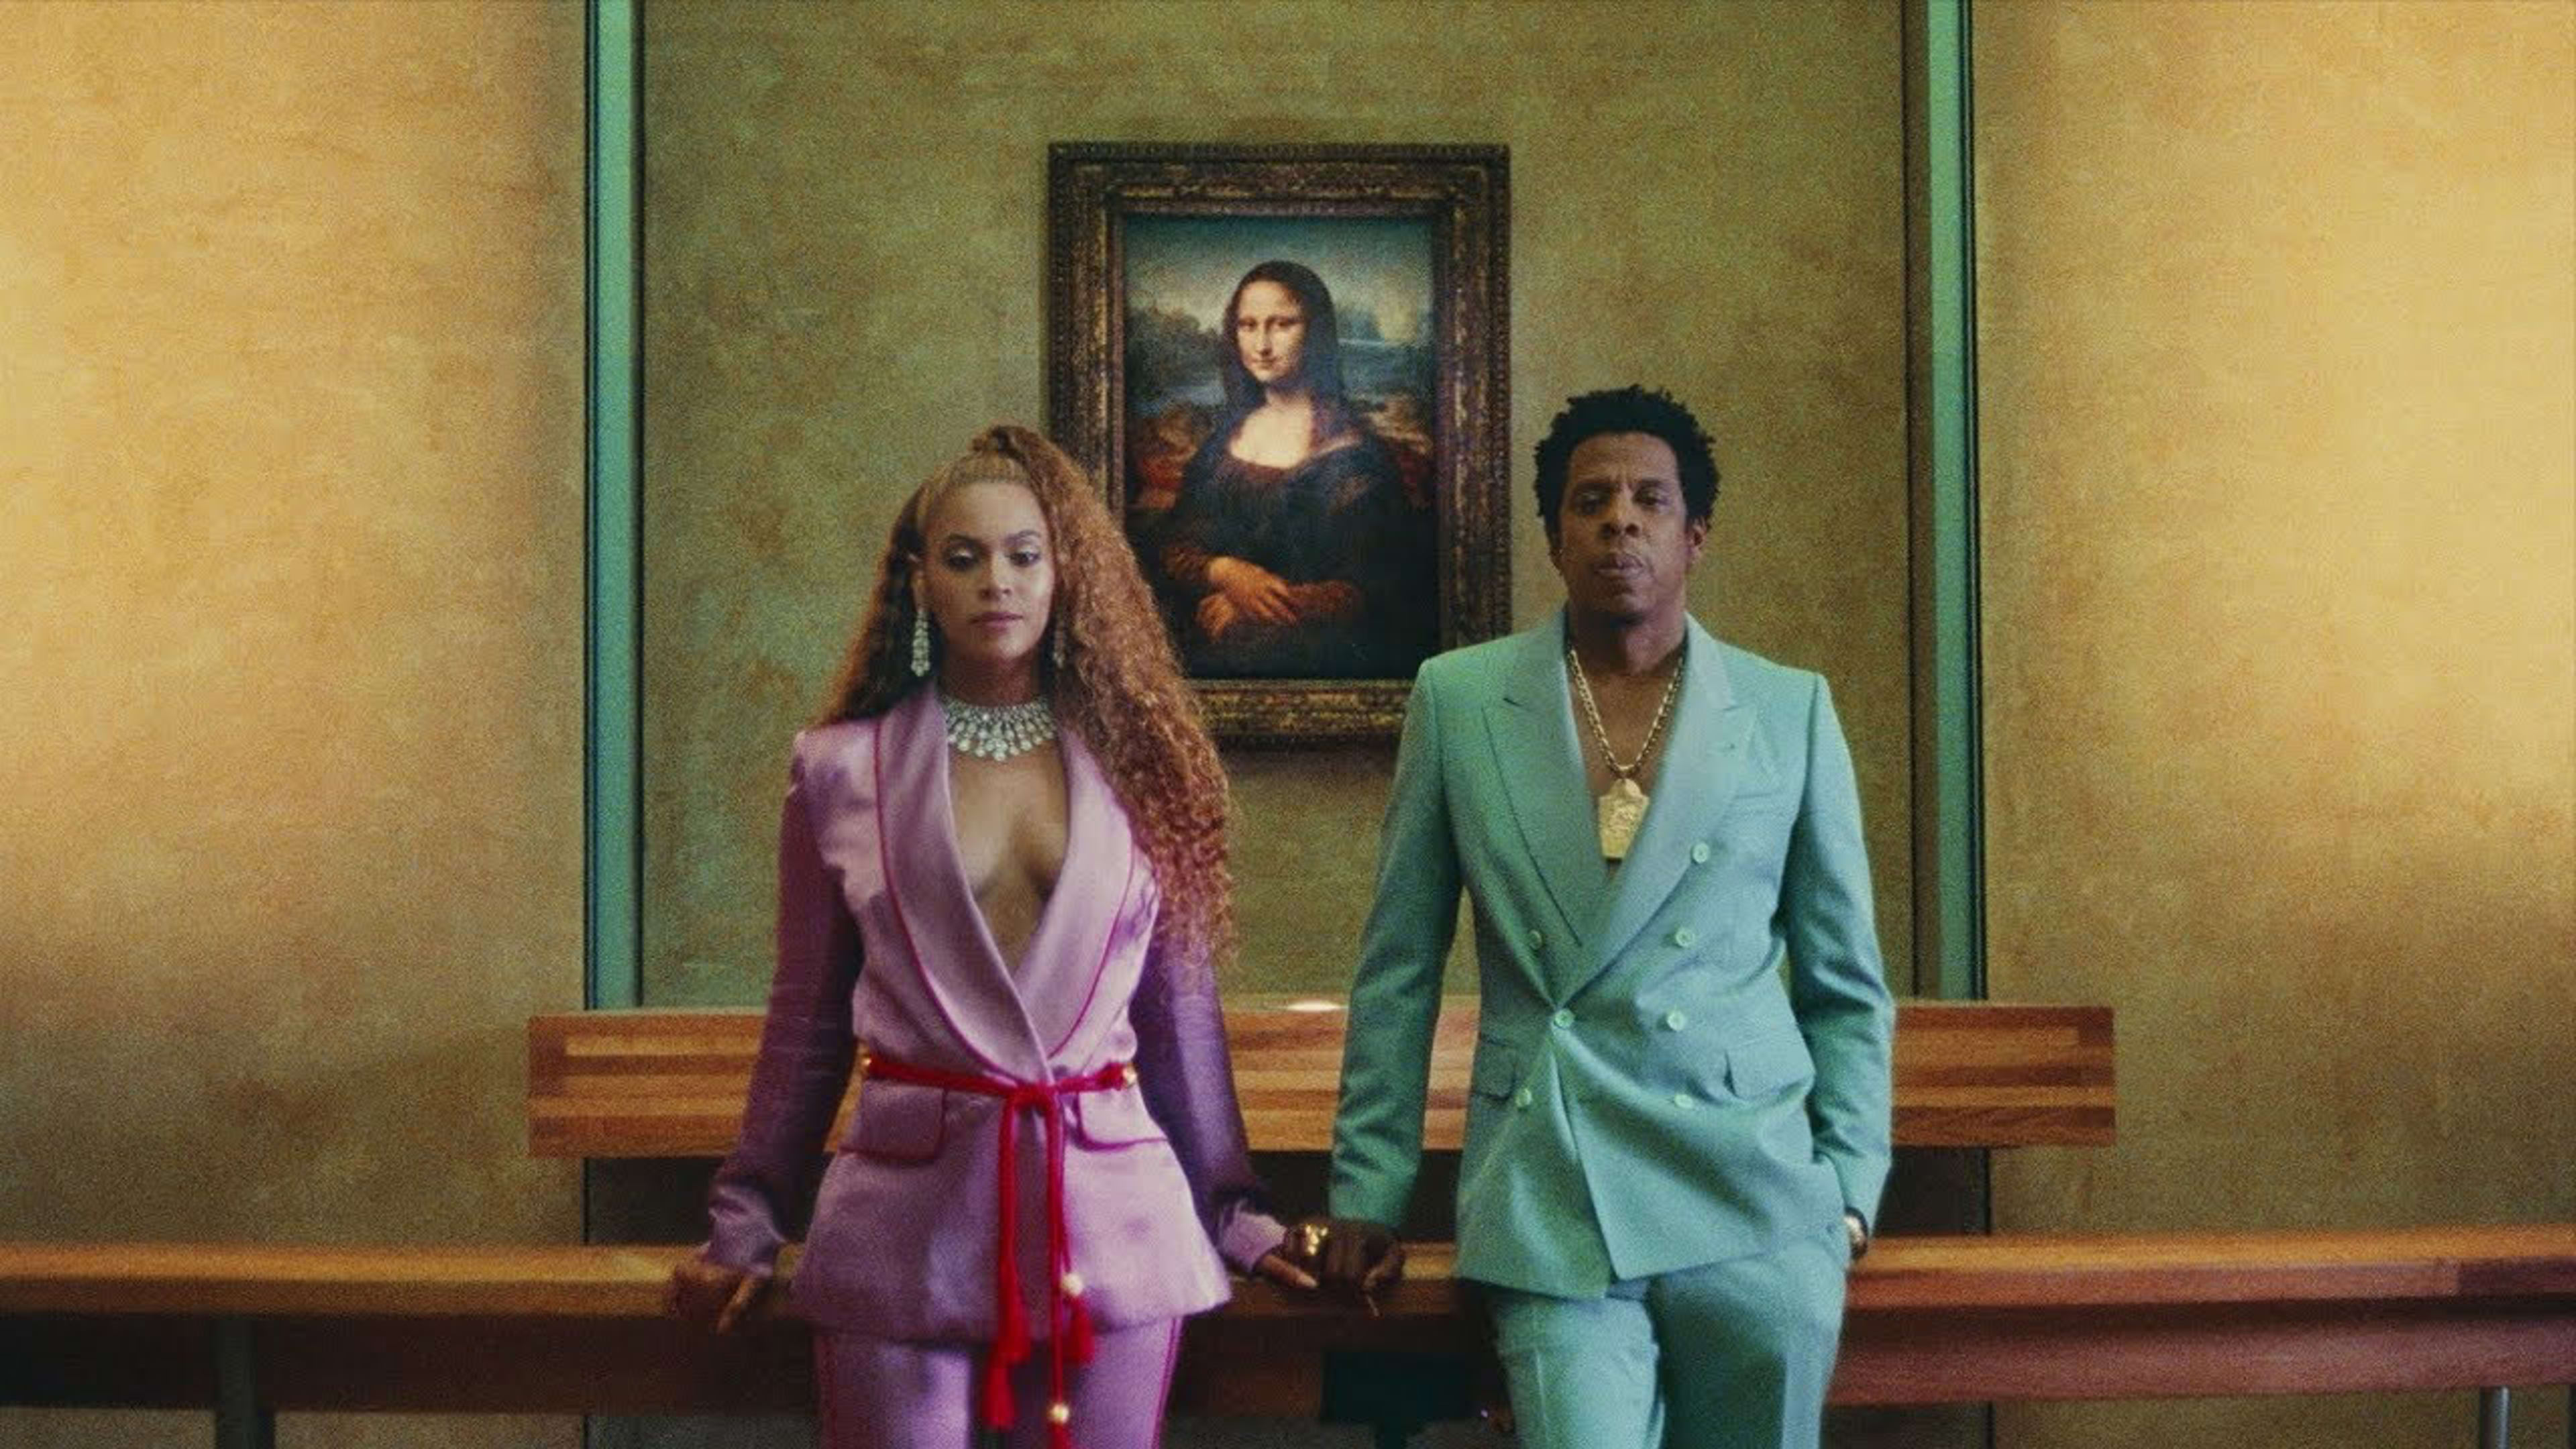 The Louvre says Beyoncé and Jay-Z helped shatter visitor records